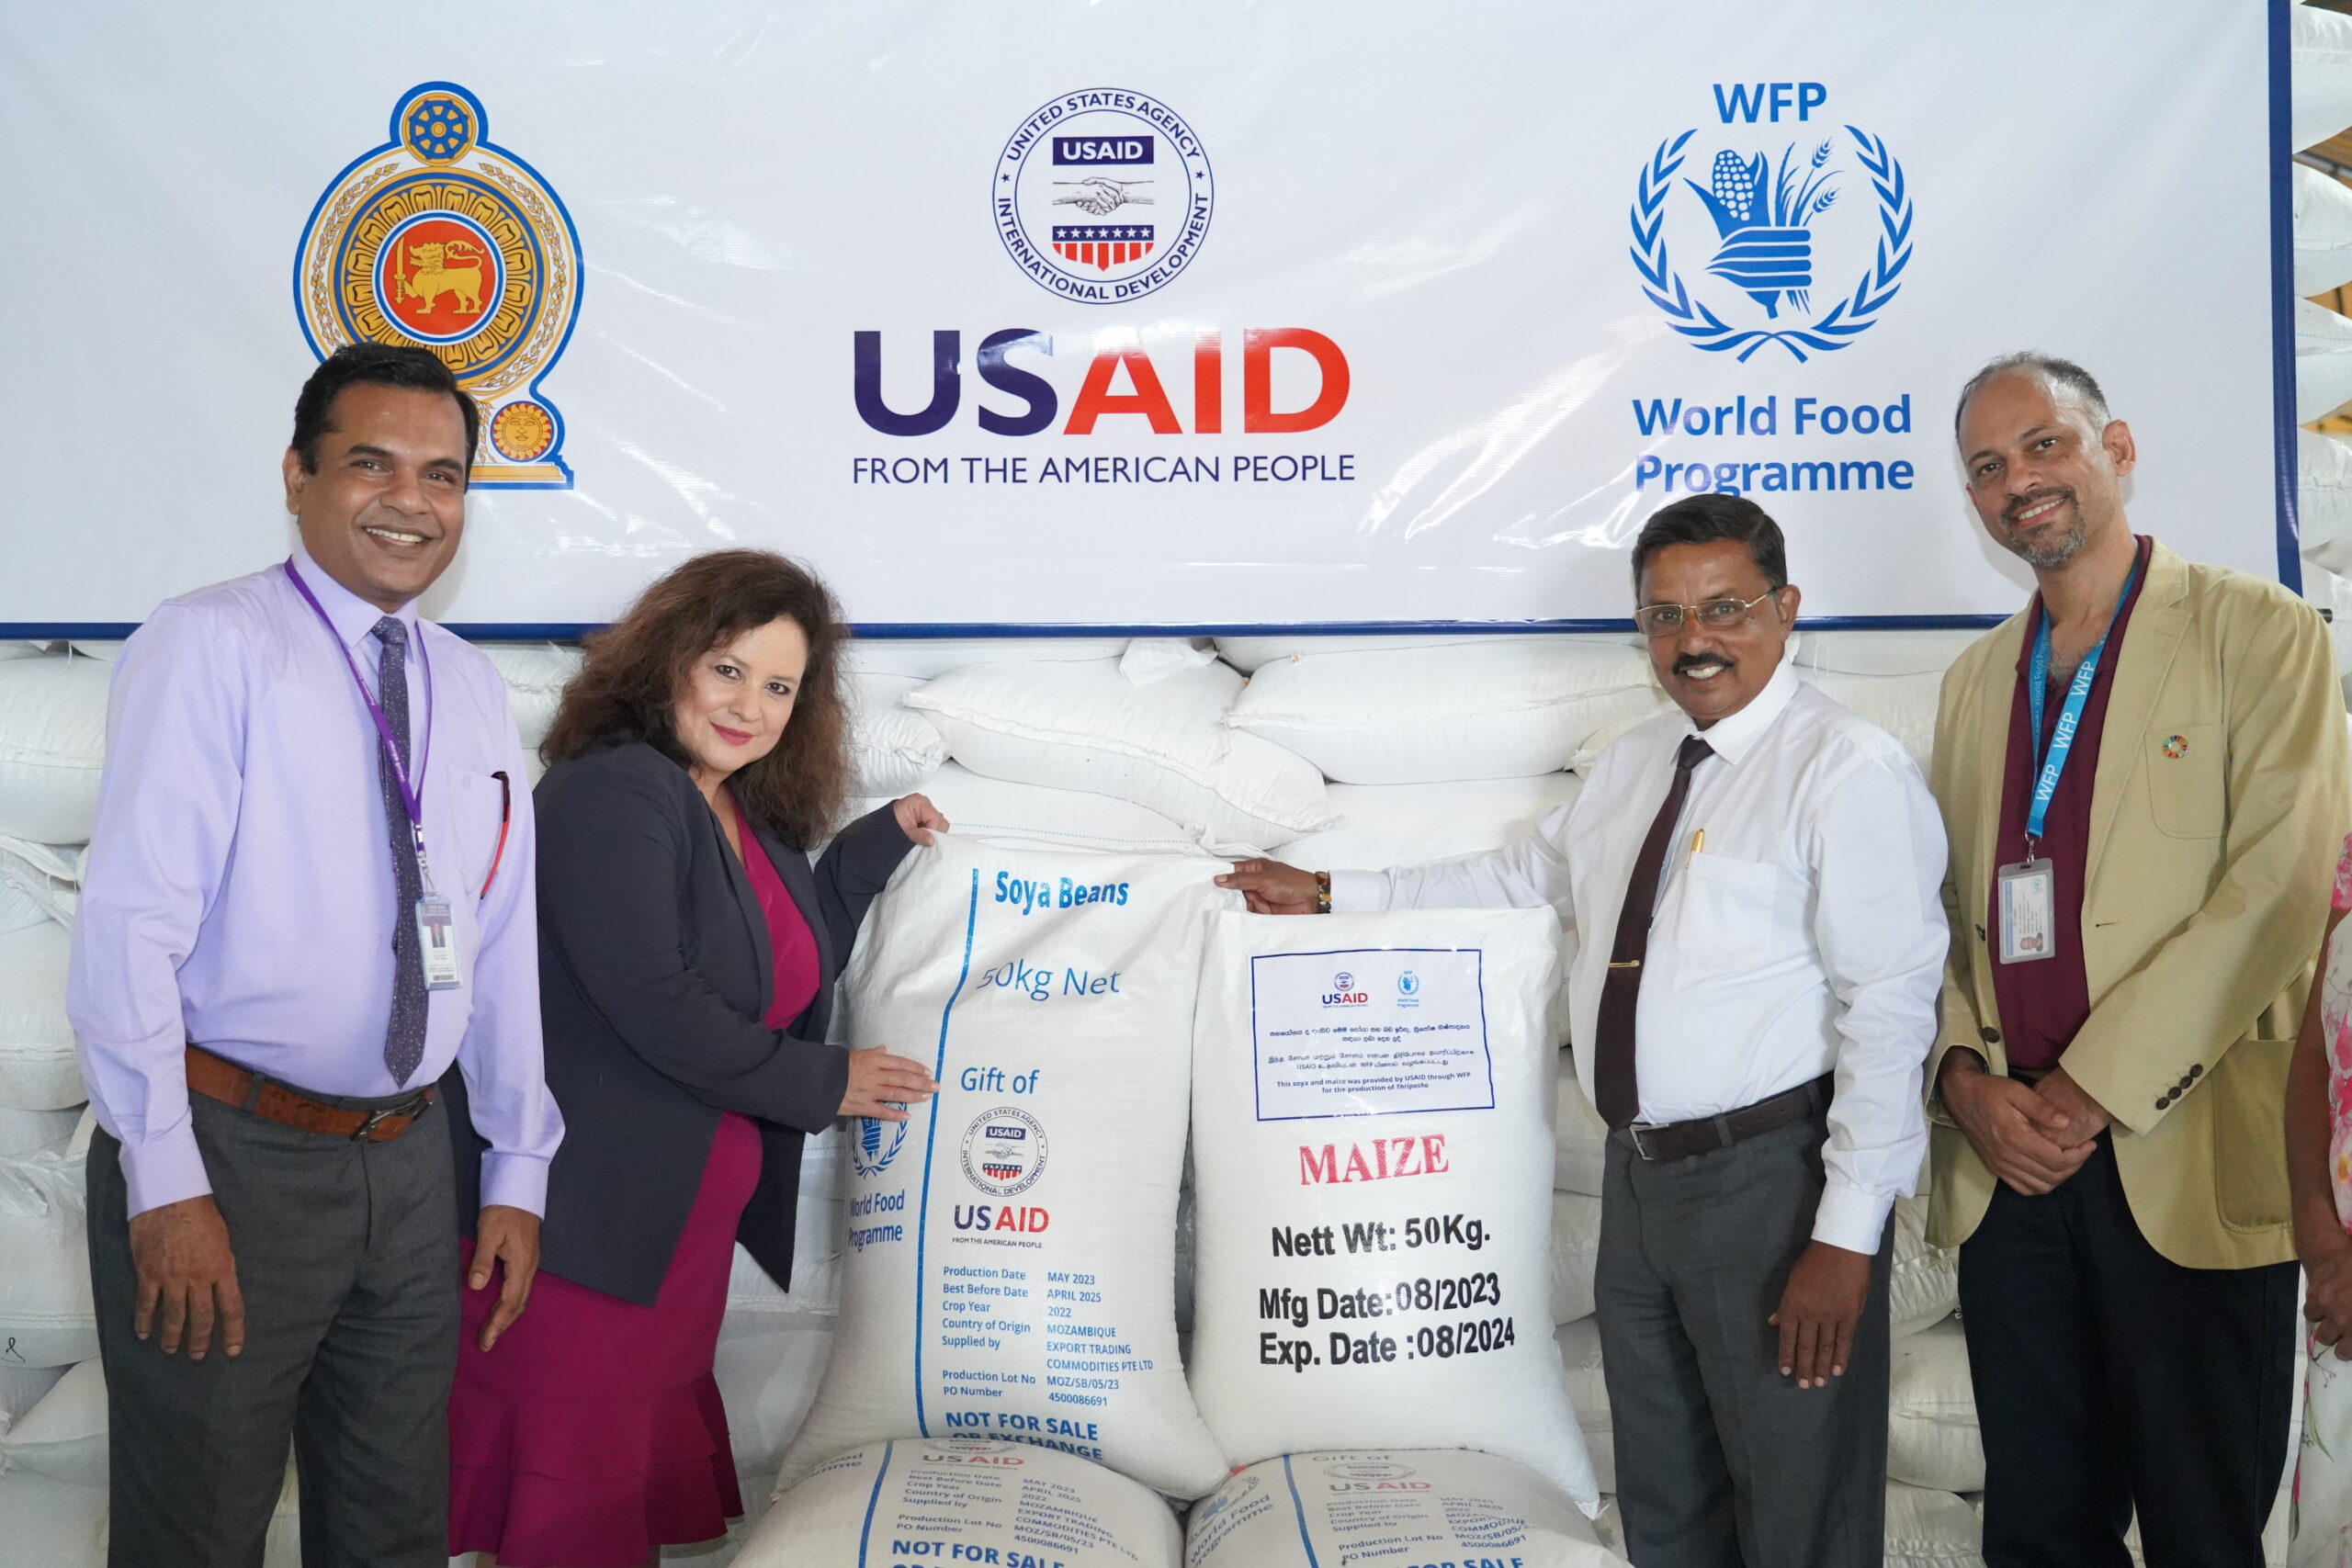 Asta Zinbo, Director of the Office of Governance and Vulnerable Populations, USAID hands over packs of soya and maize to Deepthi Kularathna, Chairman, Sri Lanka Thriposha Limited, in the presence of W.W.S. Mangala, Director of the Partnerships Secretariat for WFP Cooperation and Gerard Rebello, Deputy Country Director of WFP Sri Lanka.